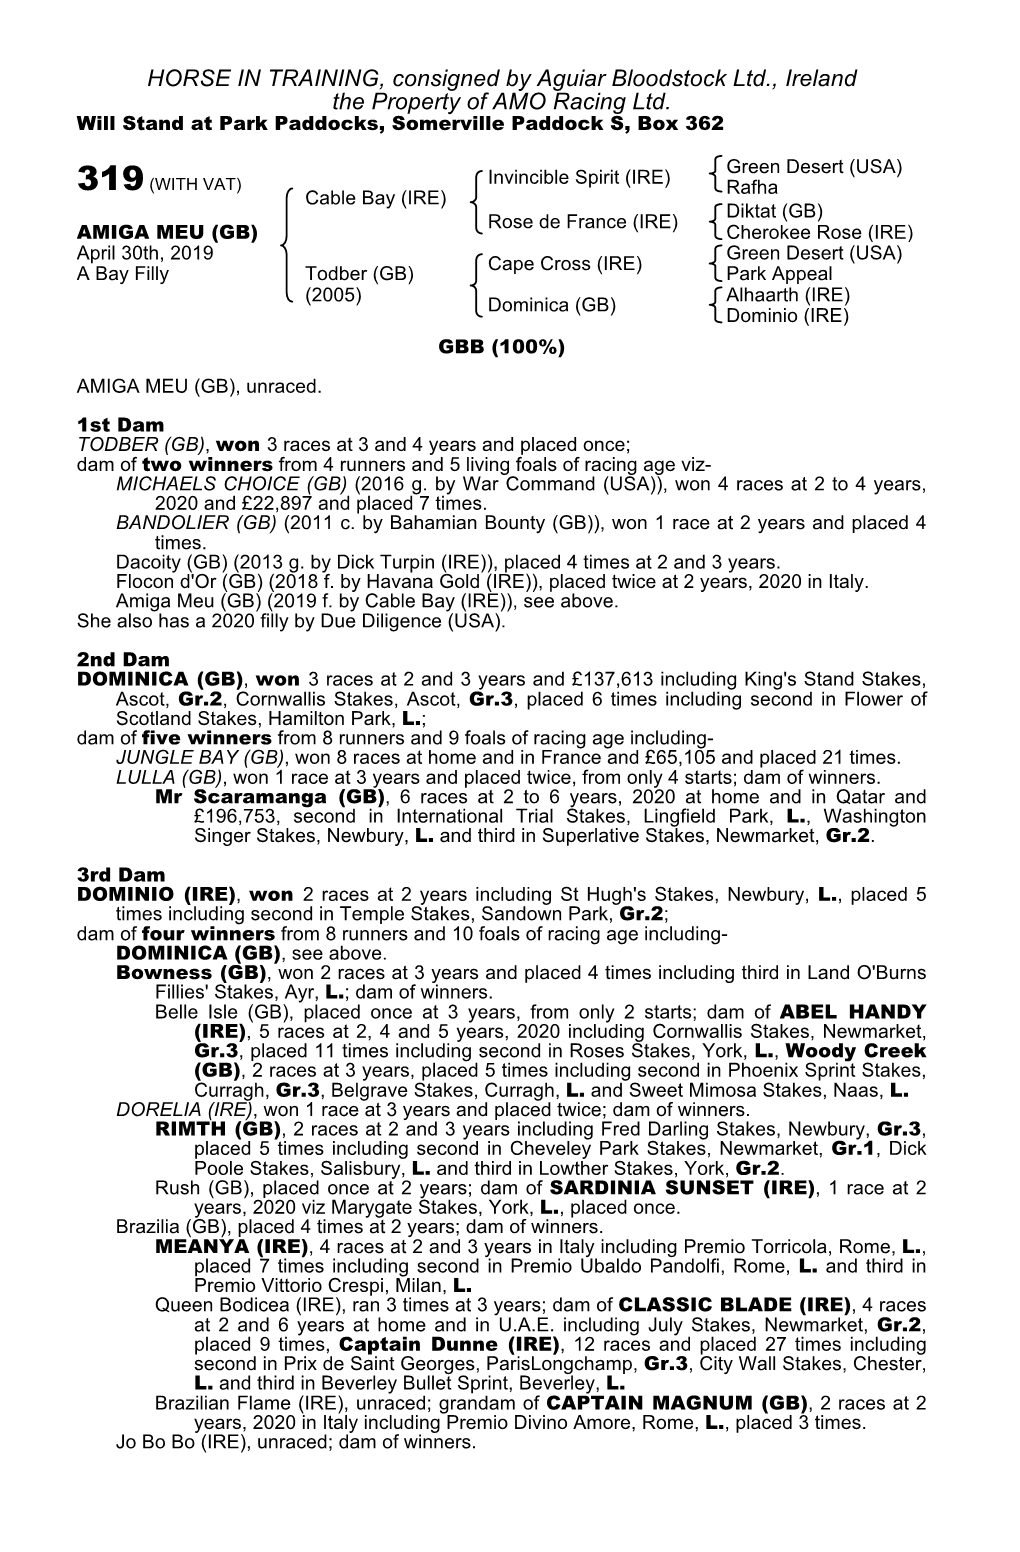 HORSE in TRAINING, Consigned by Aguiar Bloodstock Ltd., Ireland the Property of AMO Racing Ltd